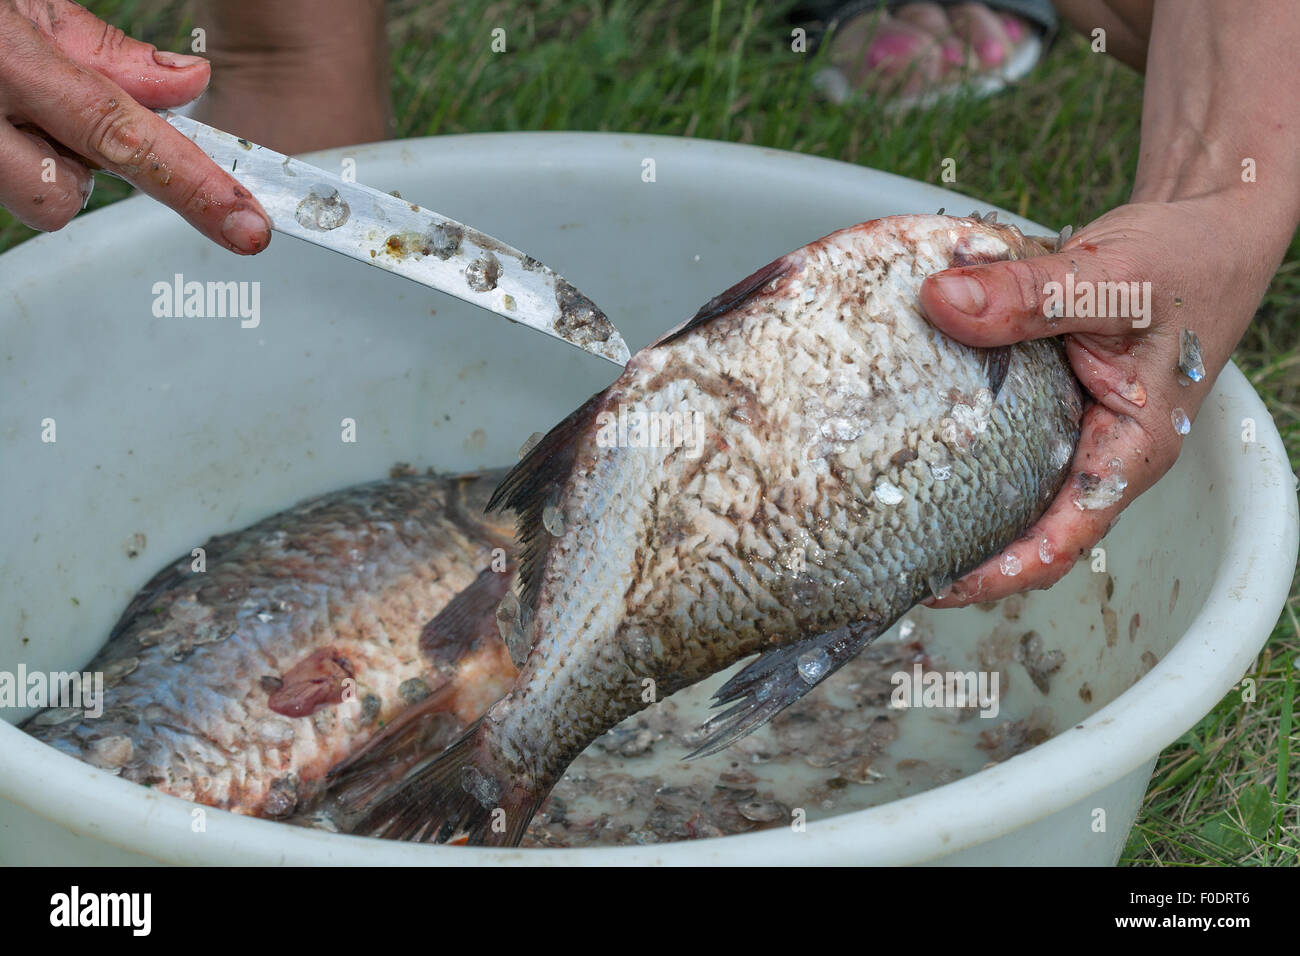 woman hands gutting and cleaning fish closeup Stock Photo